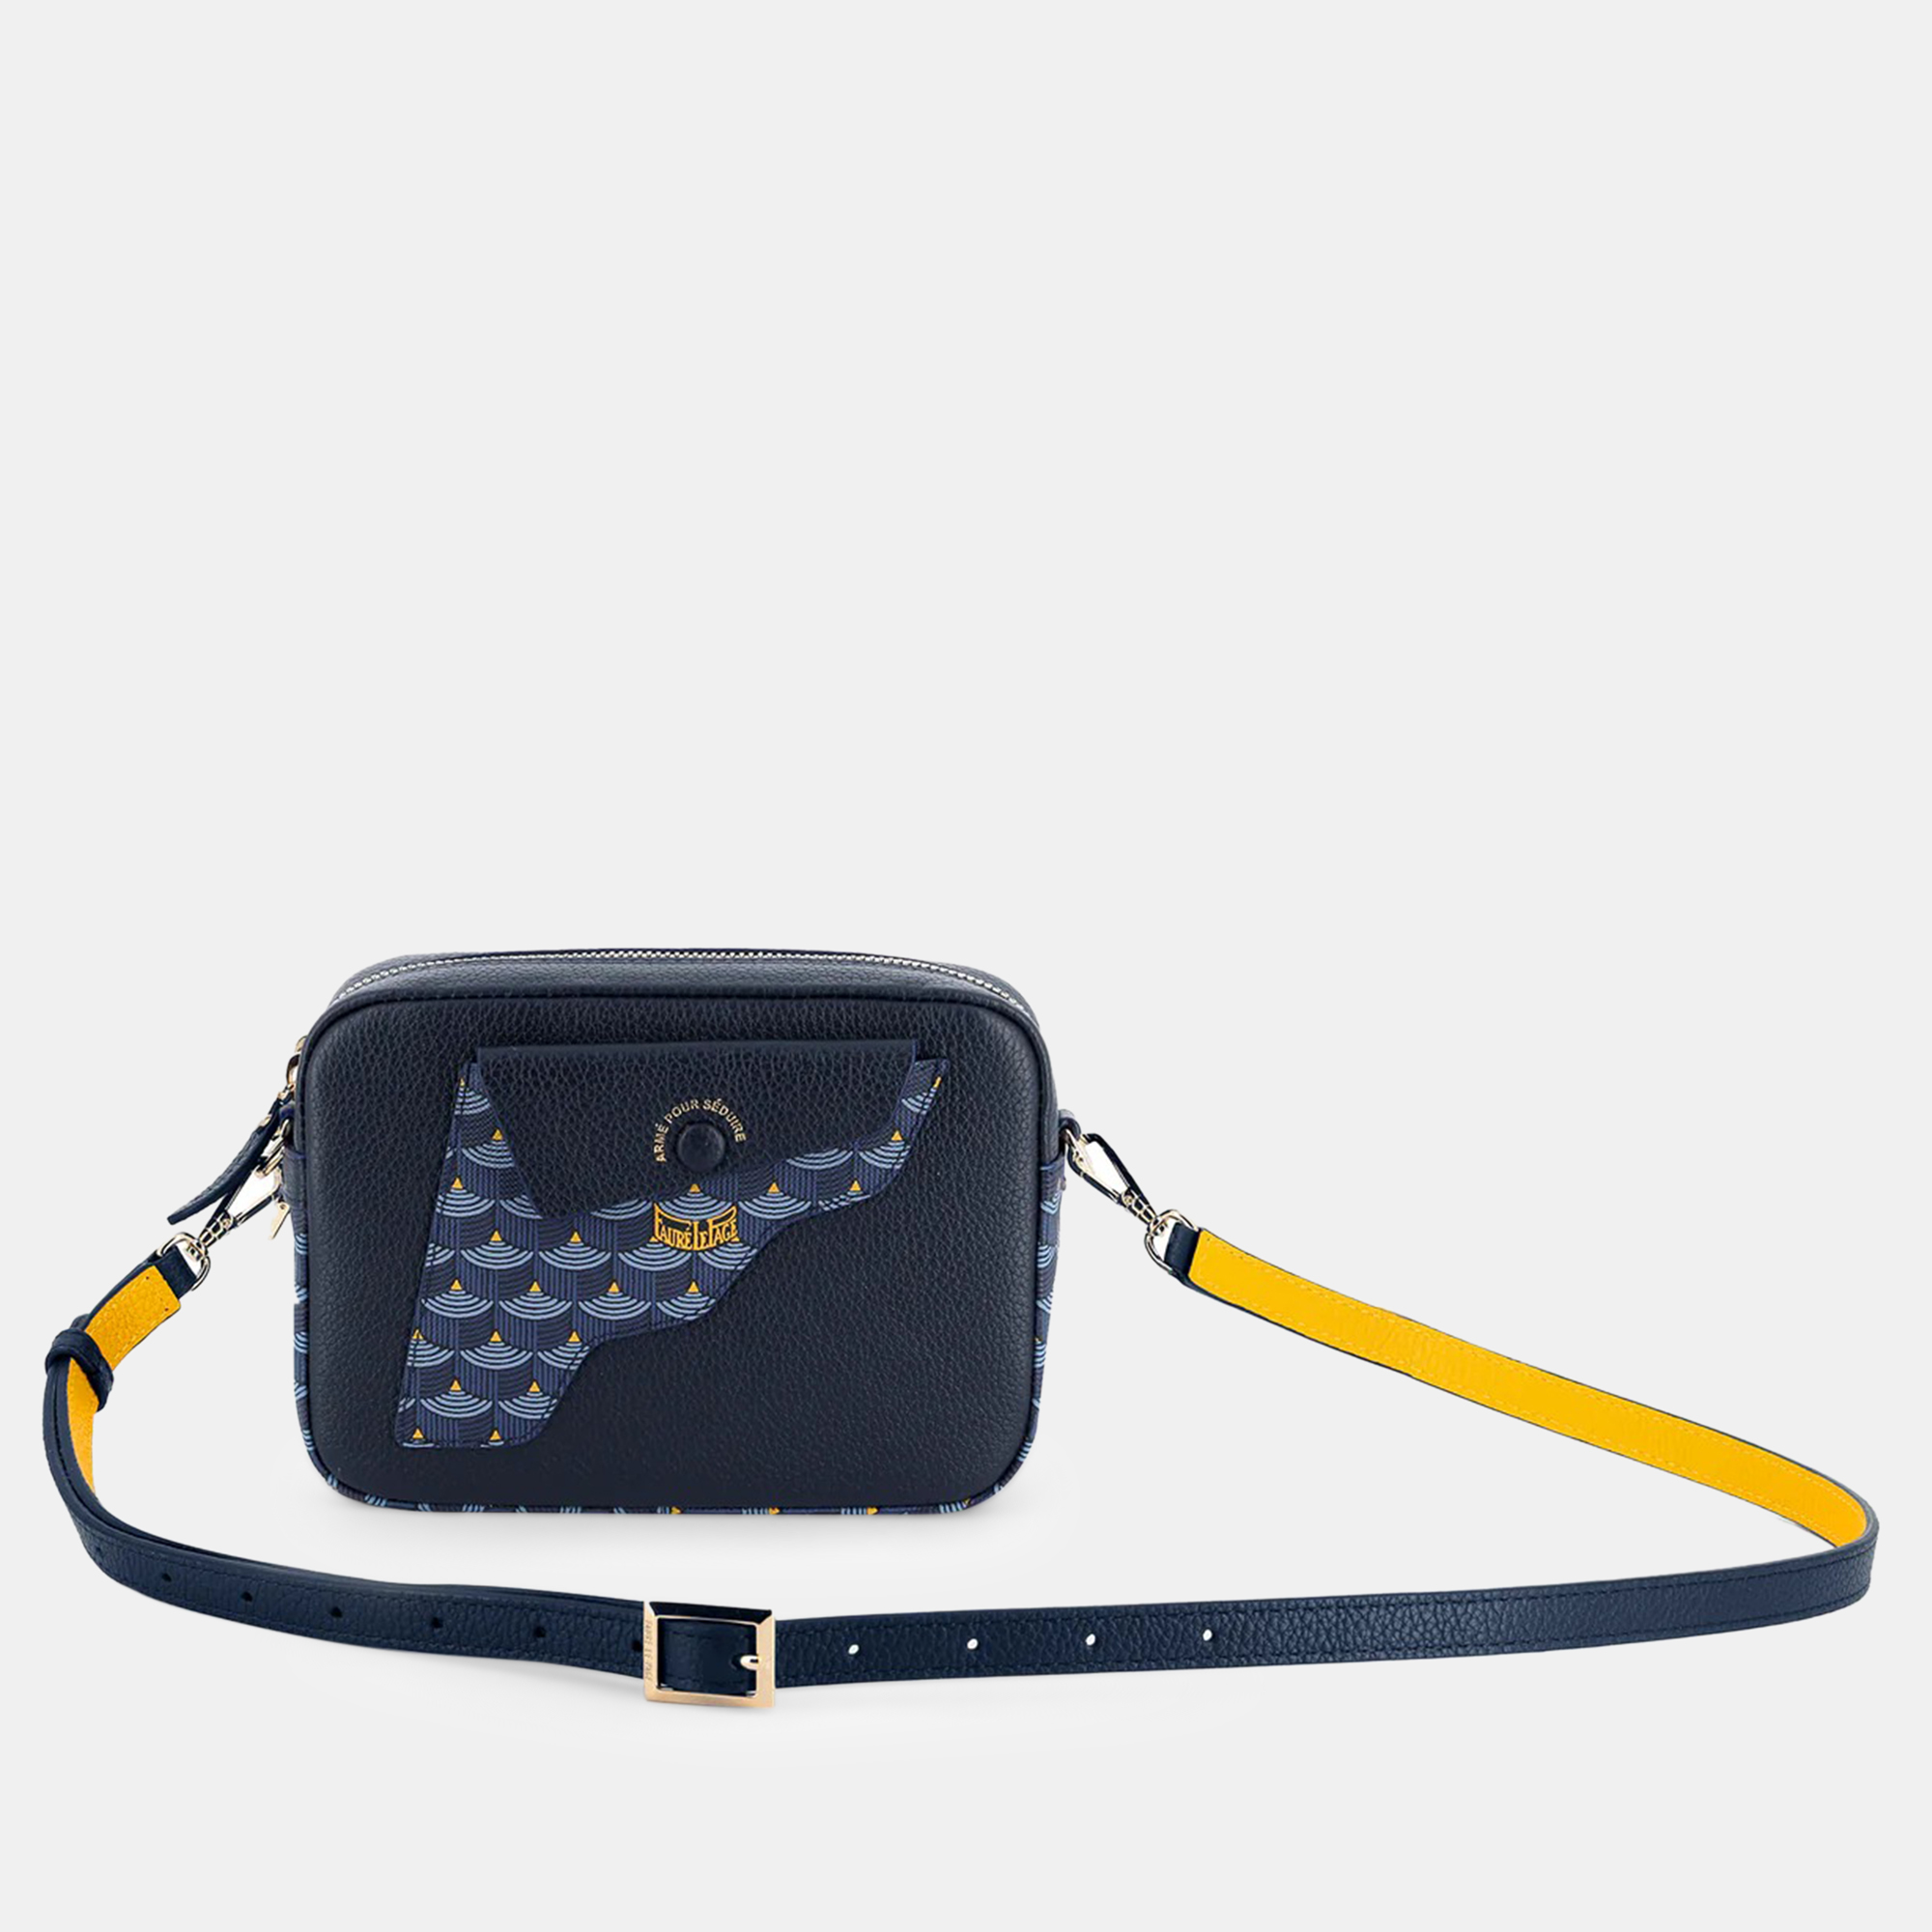 Faure Le Page Blue Leather Cross Body